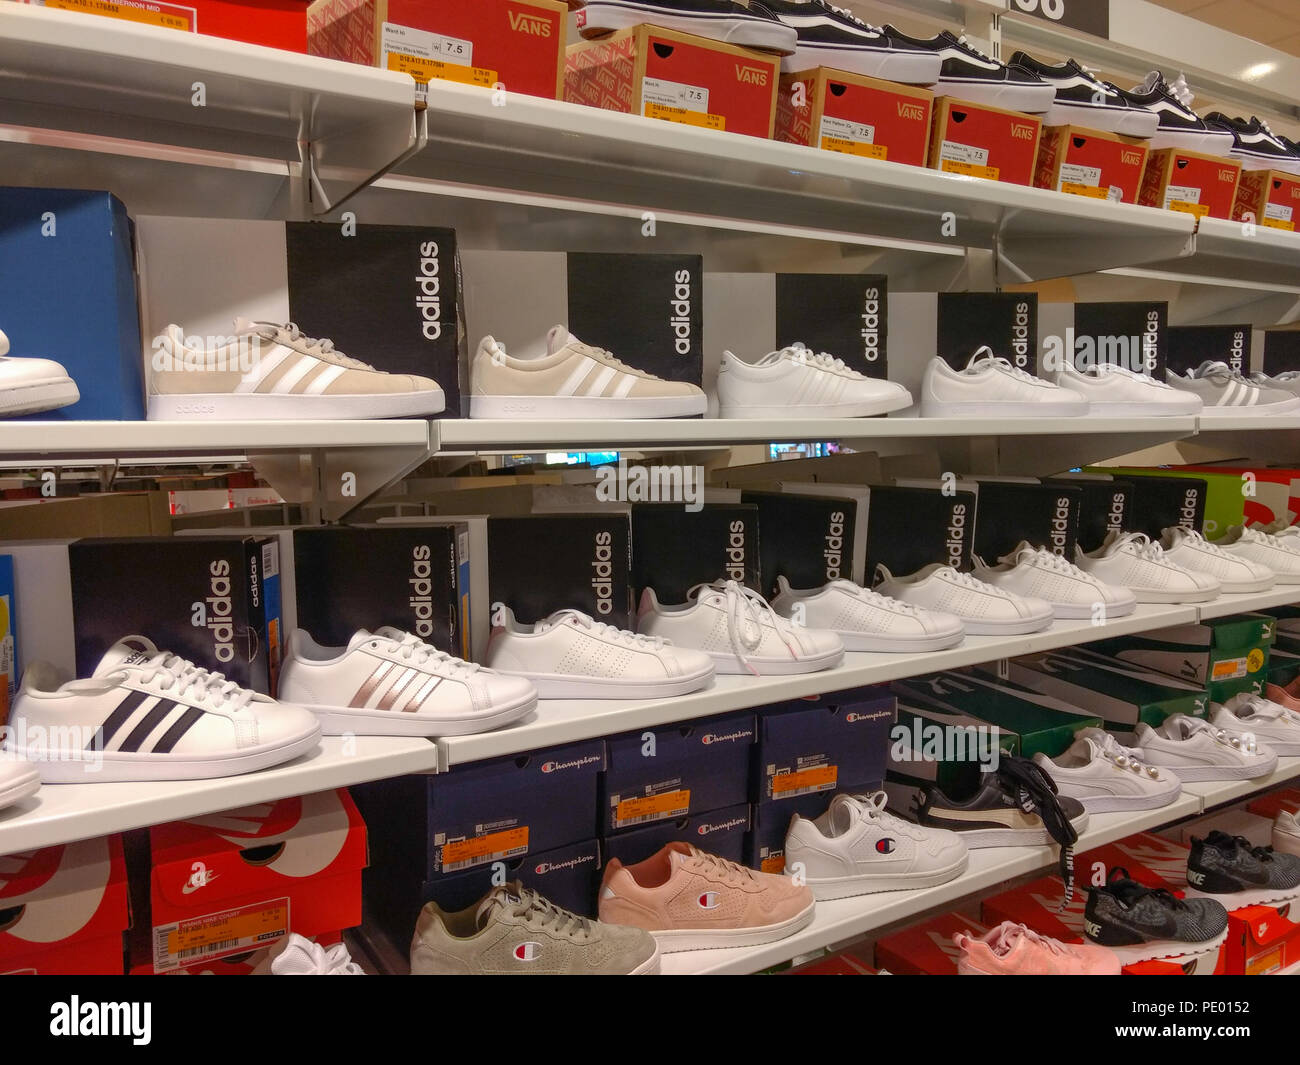 White Adidas shoes displayed on shelves in shoe store Stock Photo - Alamy